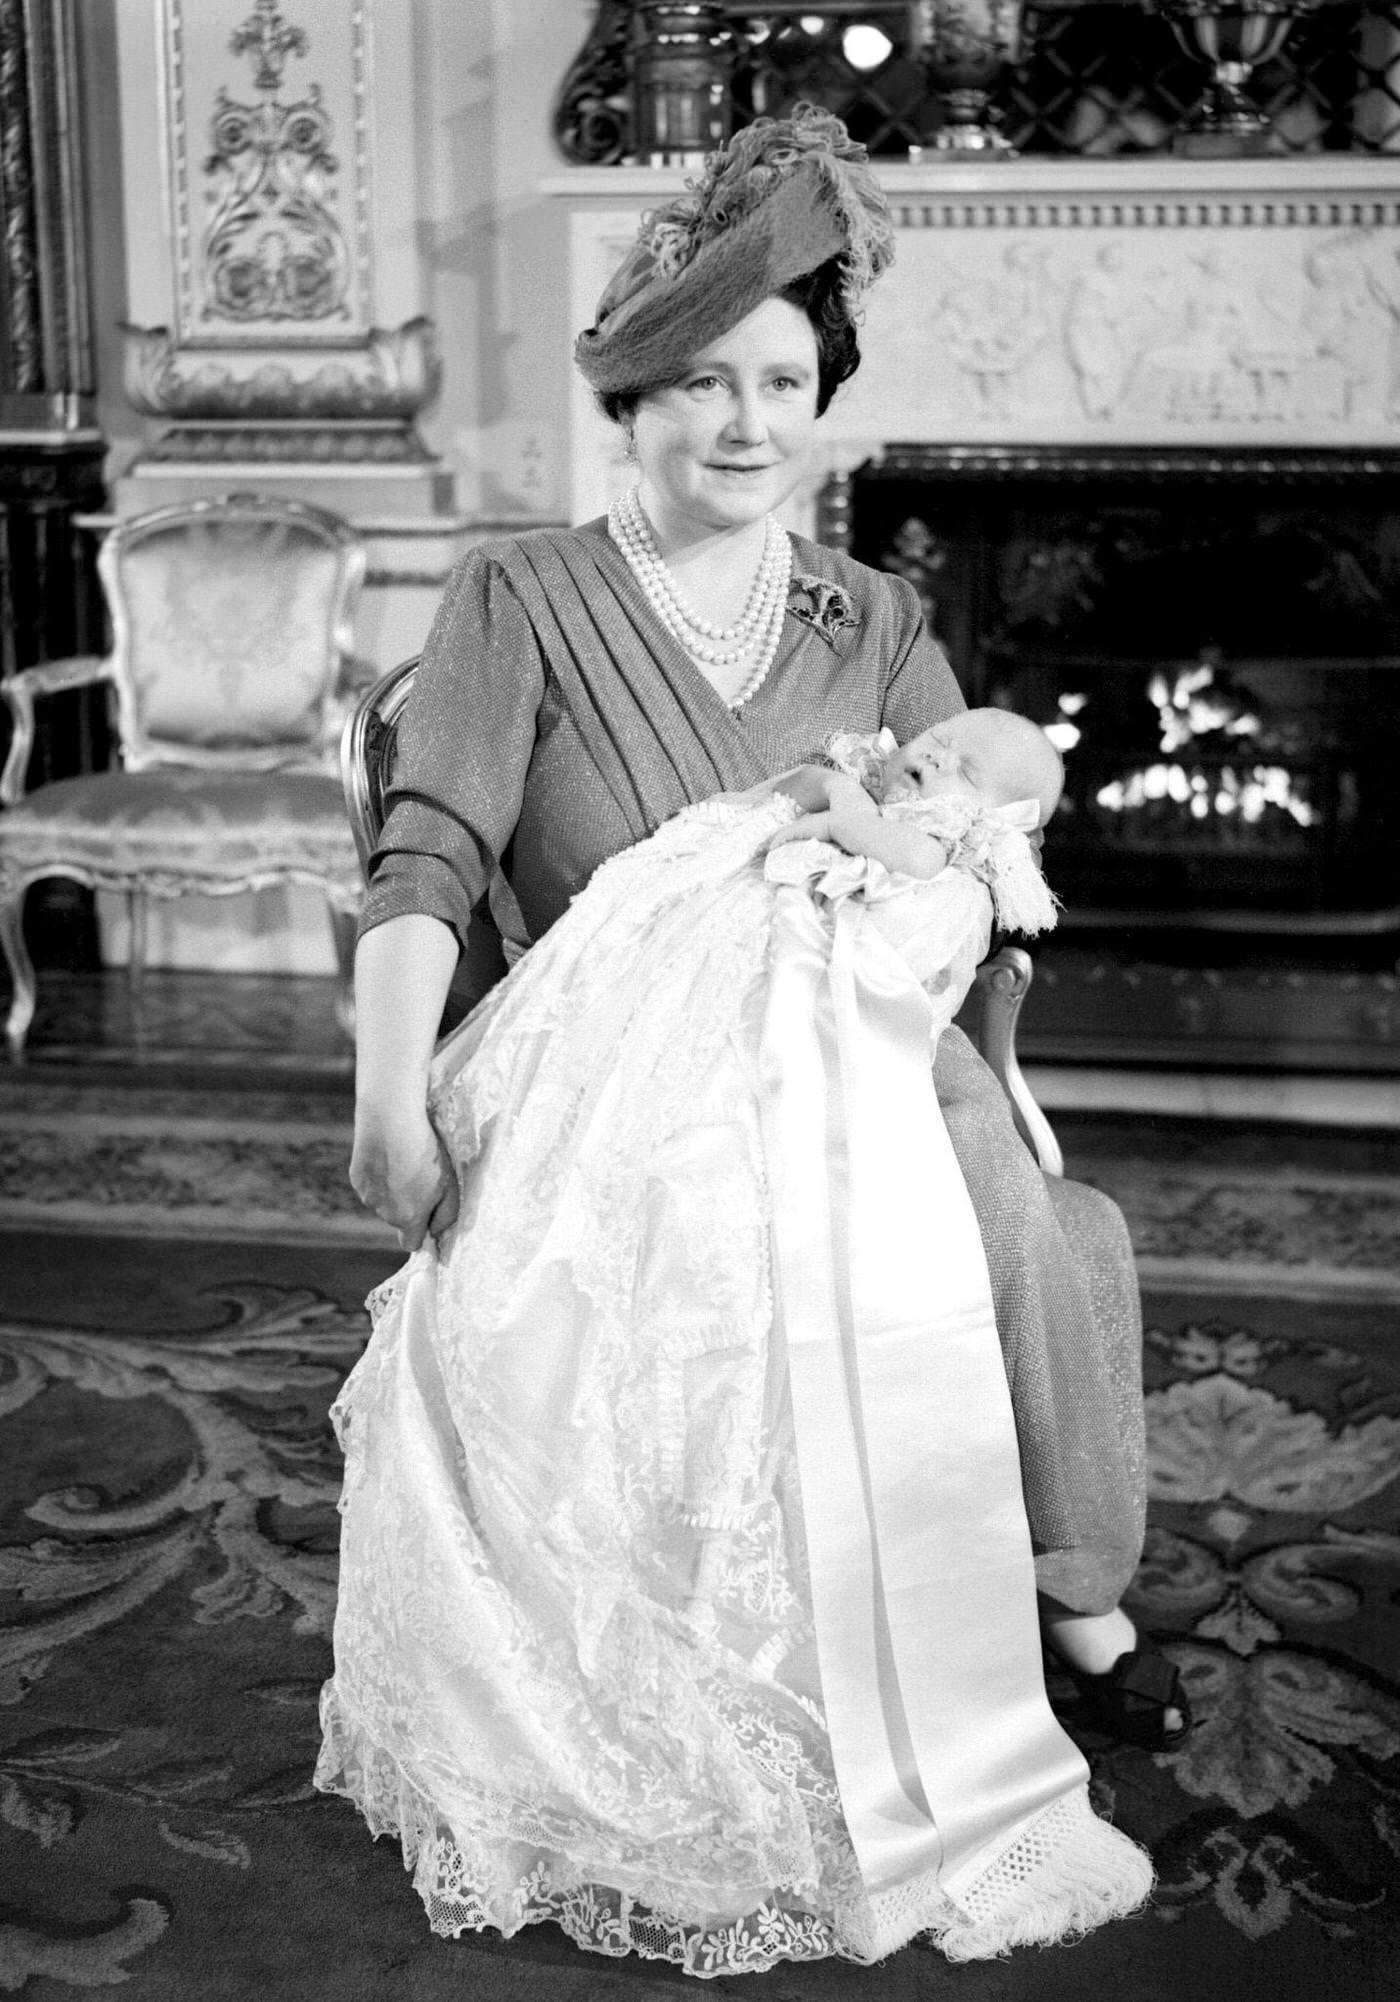 Queen Mother holding her first grandchild Prince Charles at his christening at Buckingham Palace, 1950.